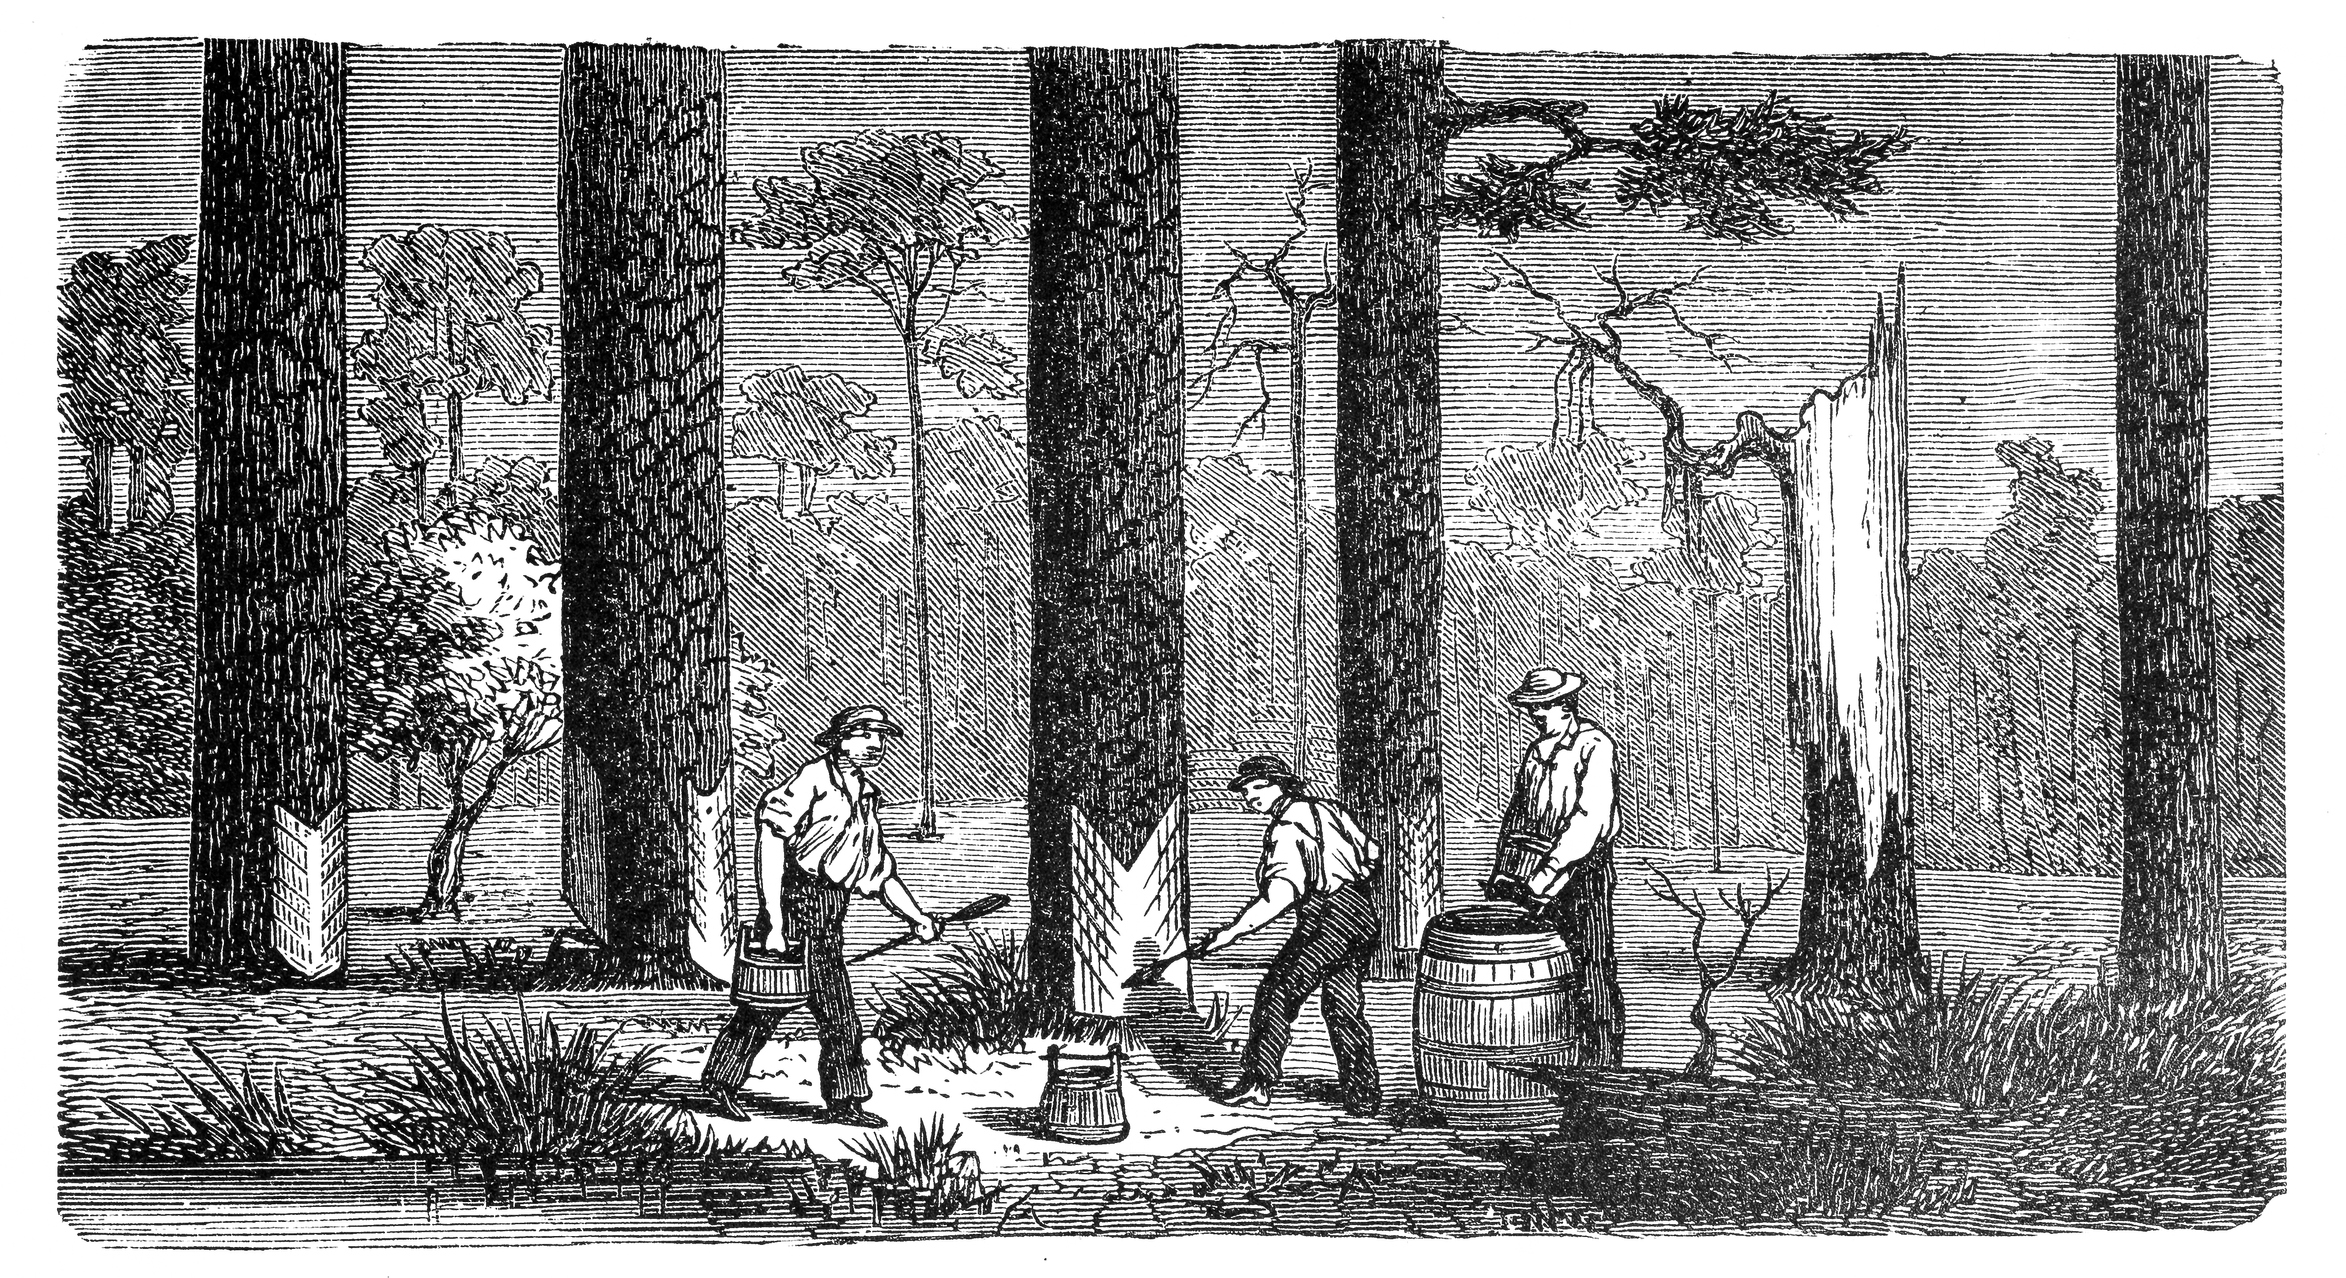 A black and white illustration of turpentine resin harvesting.